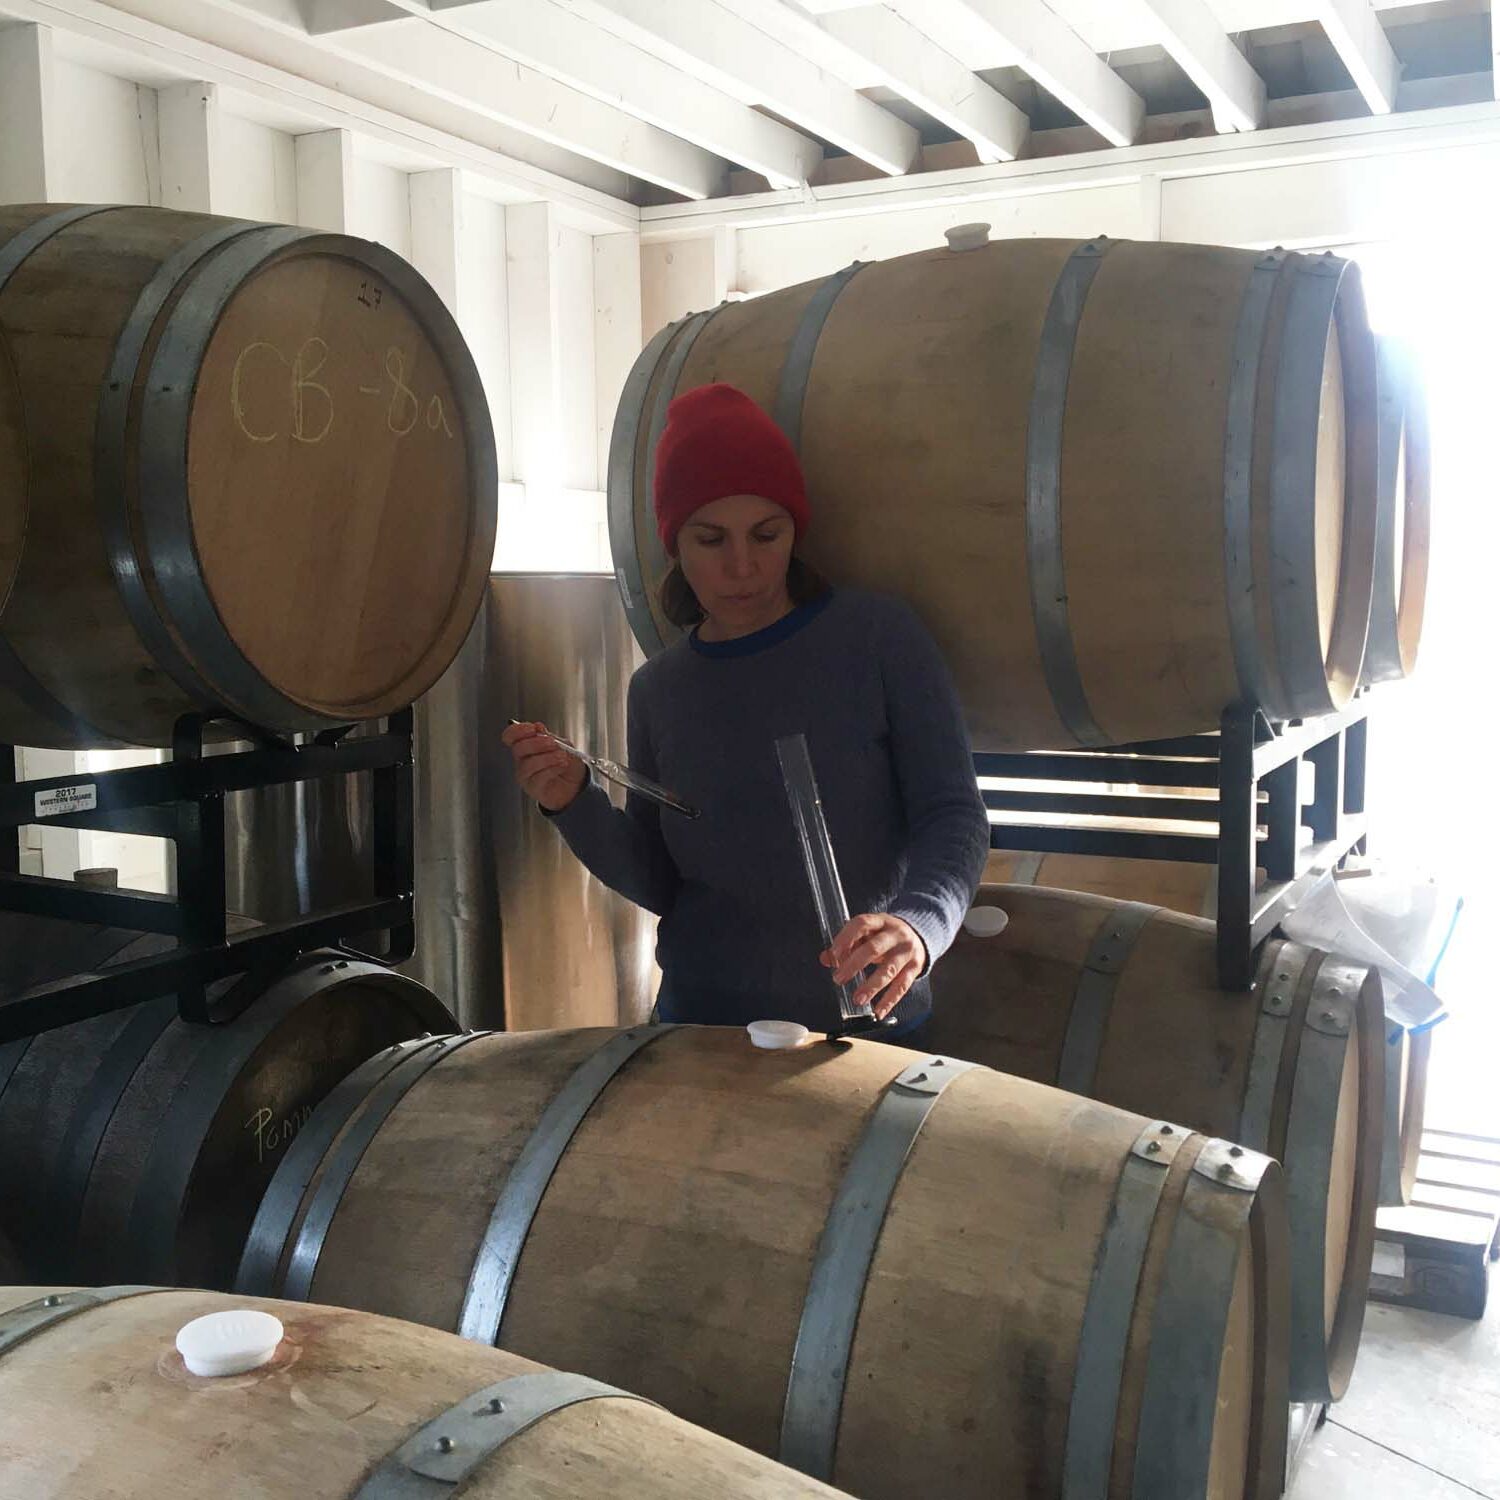 Autumn Stoscheck of Eve's Cidery, among barrels at the cidery. Credit: Ezra Sherman.